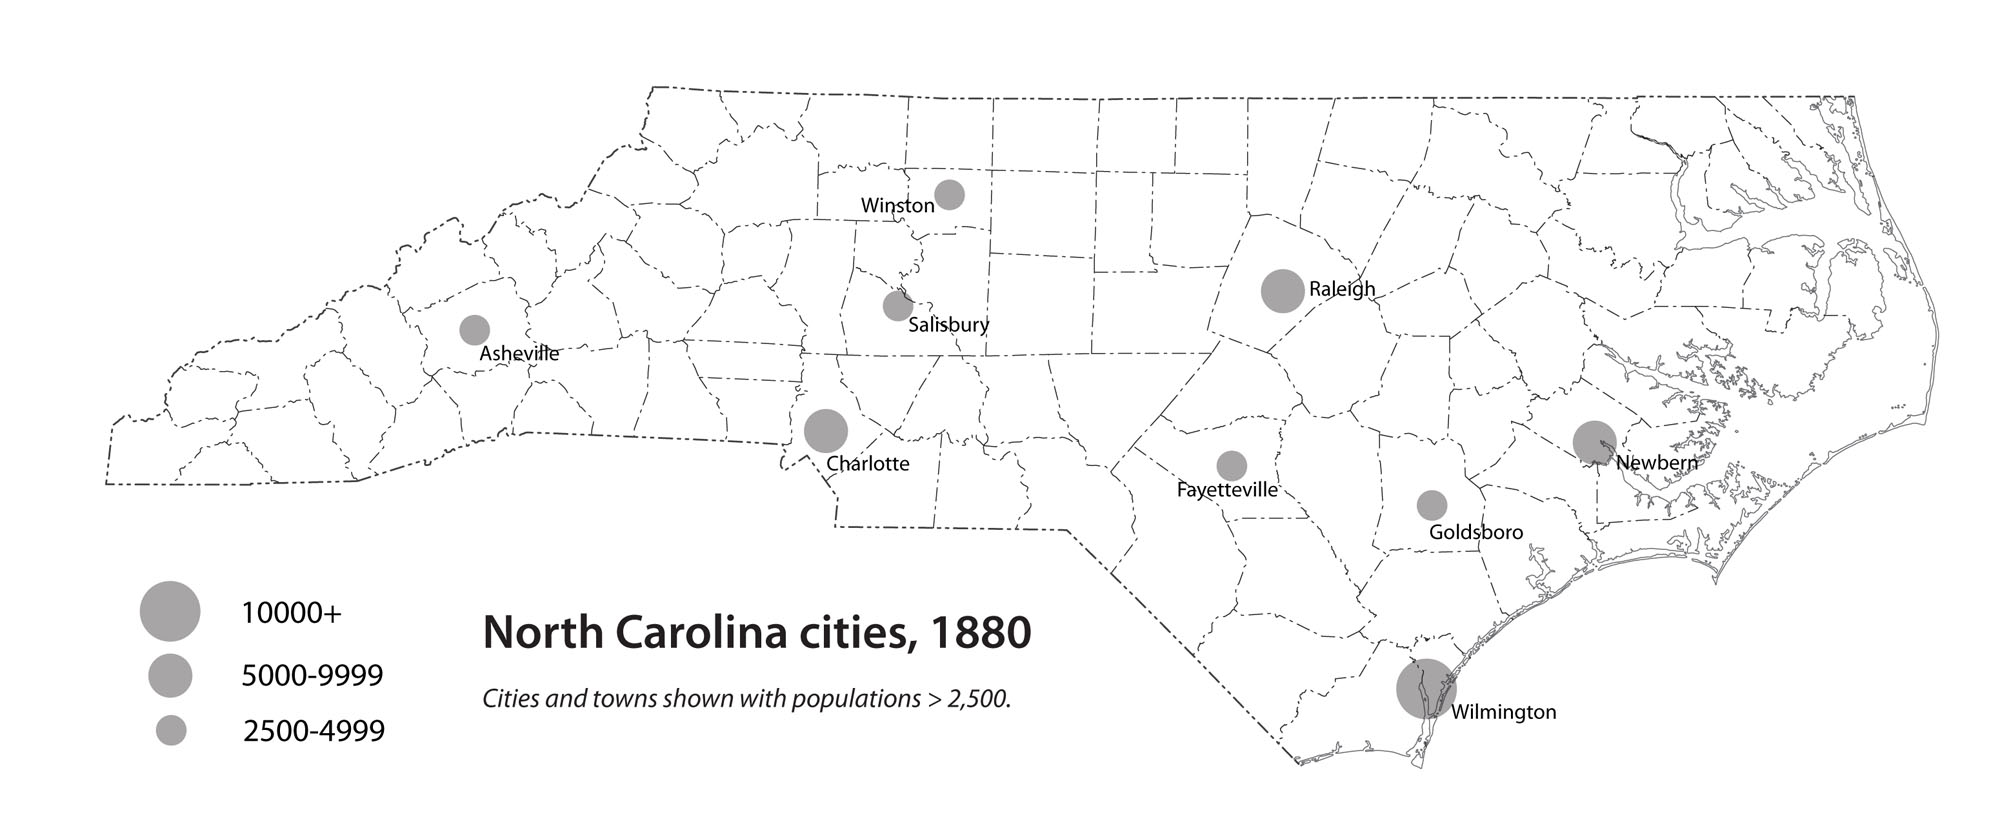 Map of North Carolina cities in 1880